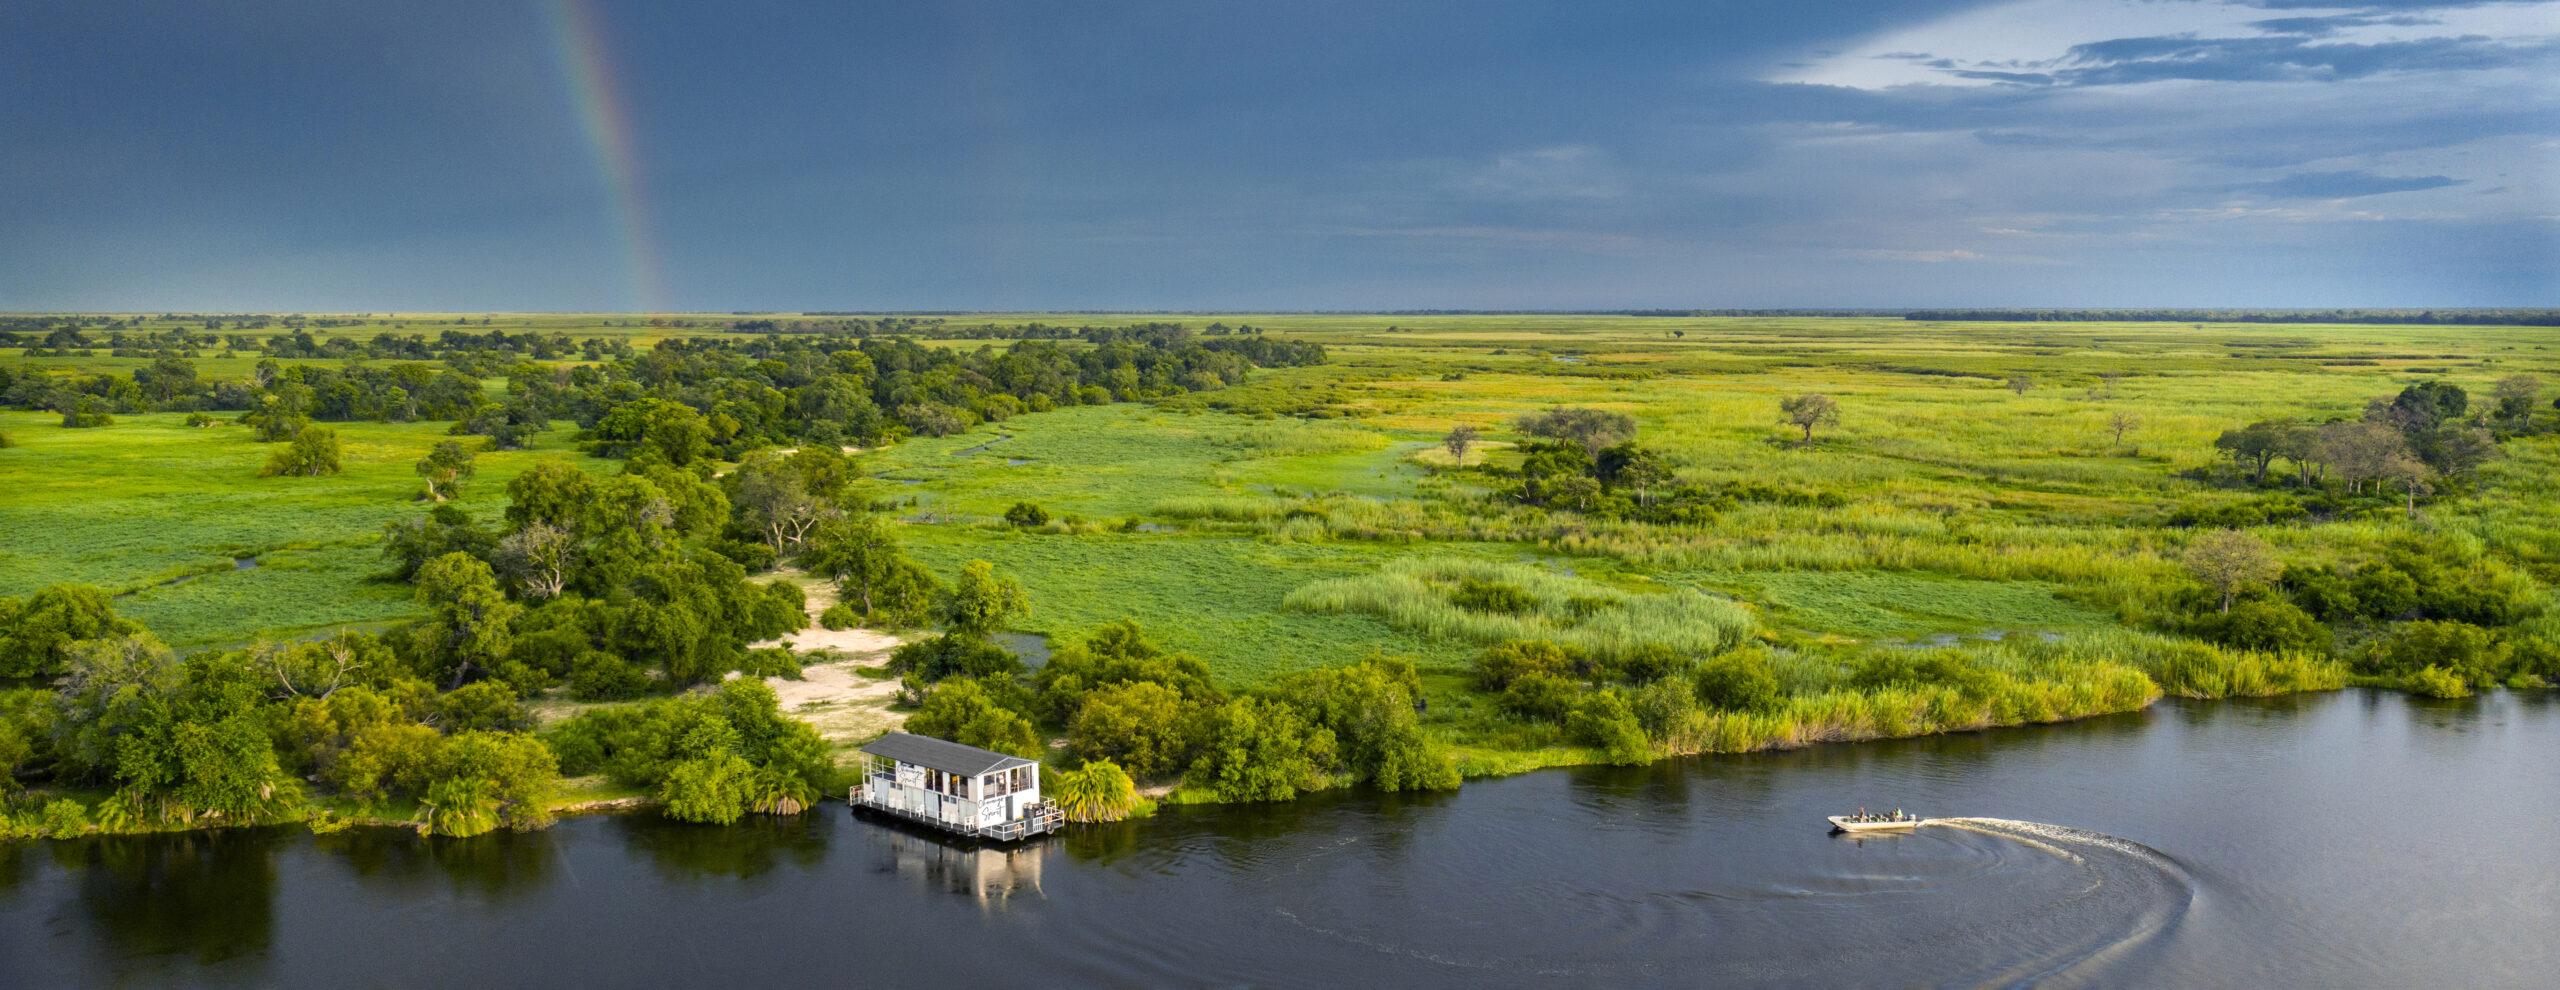 The lush Okavango Delta radiates in shades of green backdropped by a moody, rainbow-crowned sky. Image courtesy of Natural Selection.